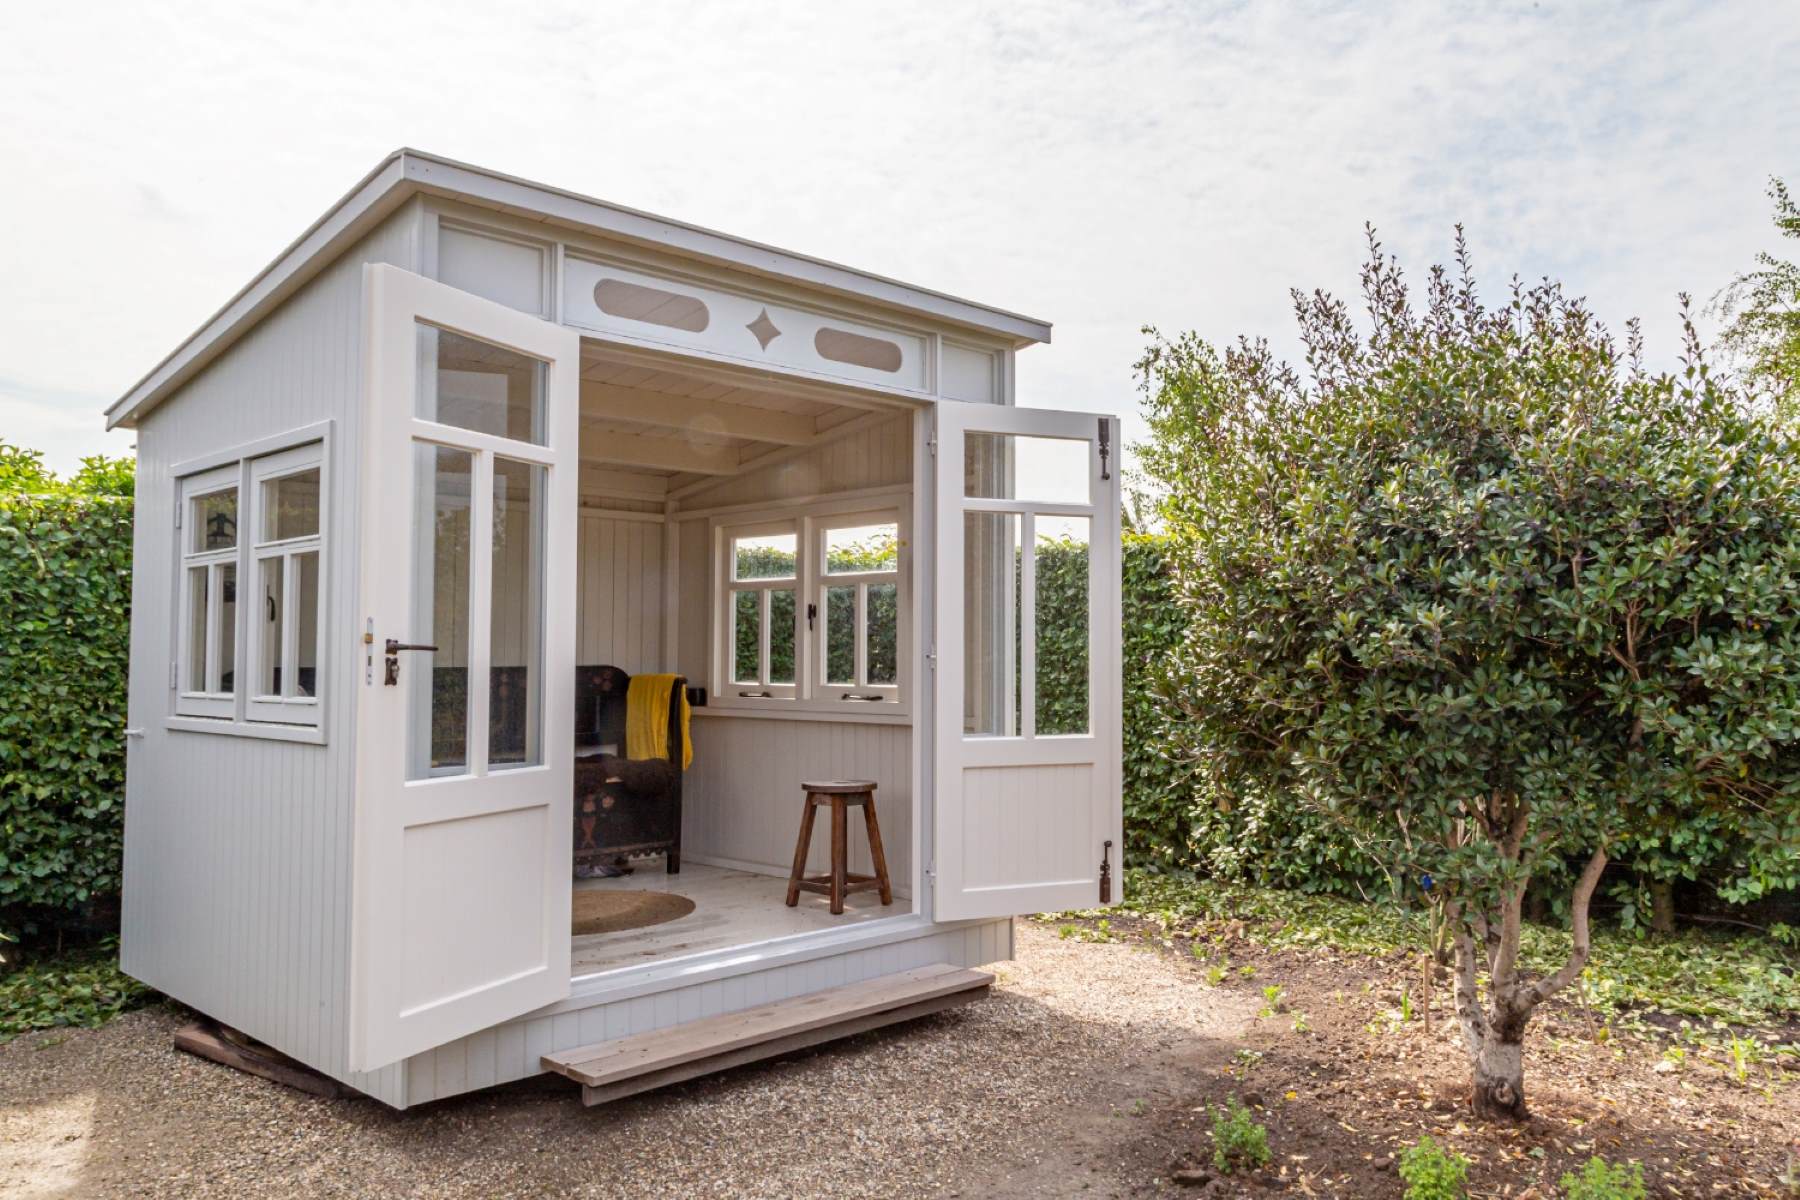 The Surprising Cost Of Building A 12×12 Shed Revealed!